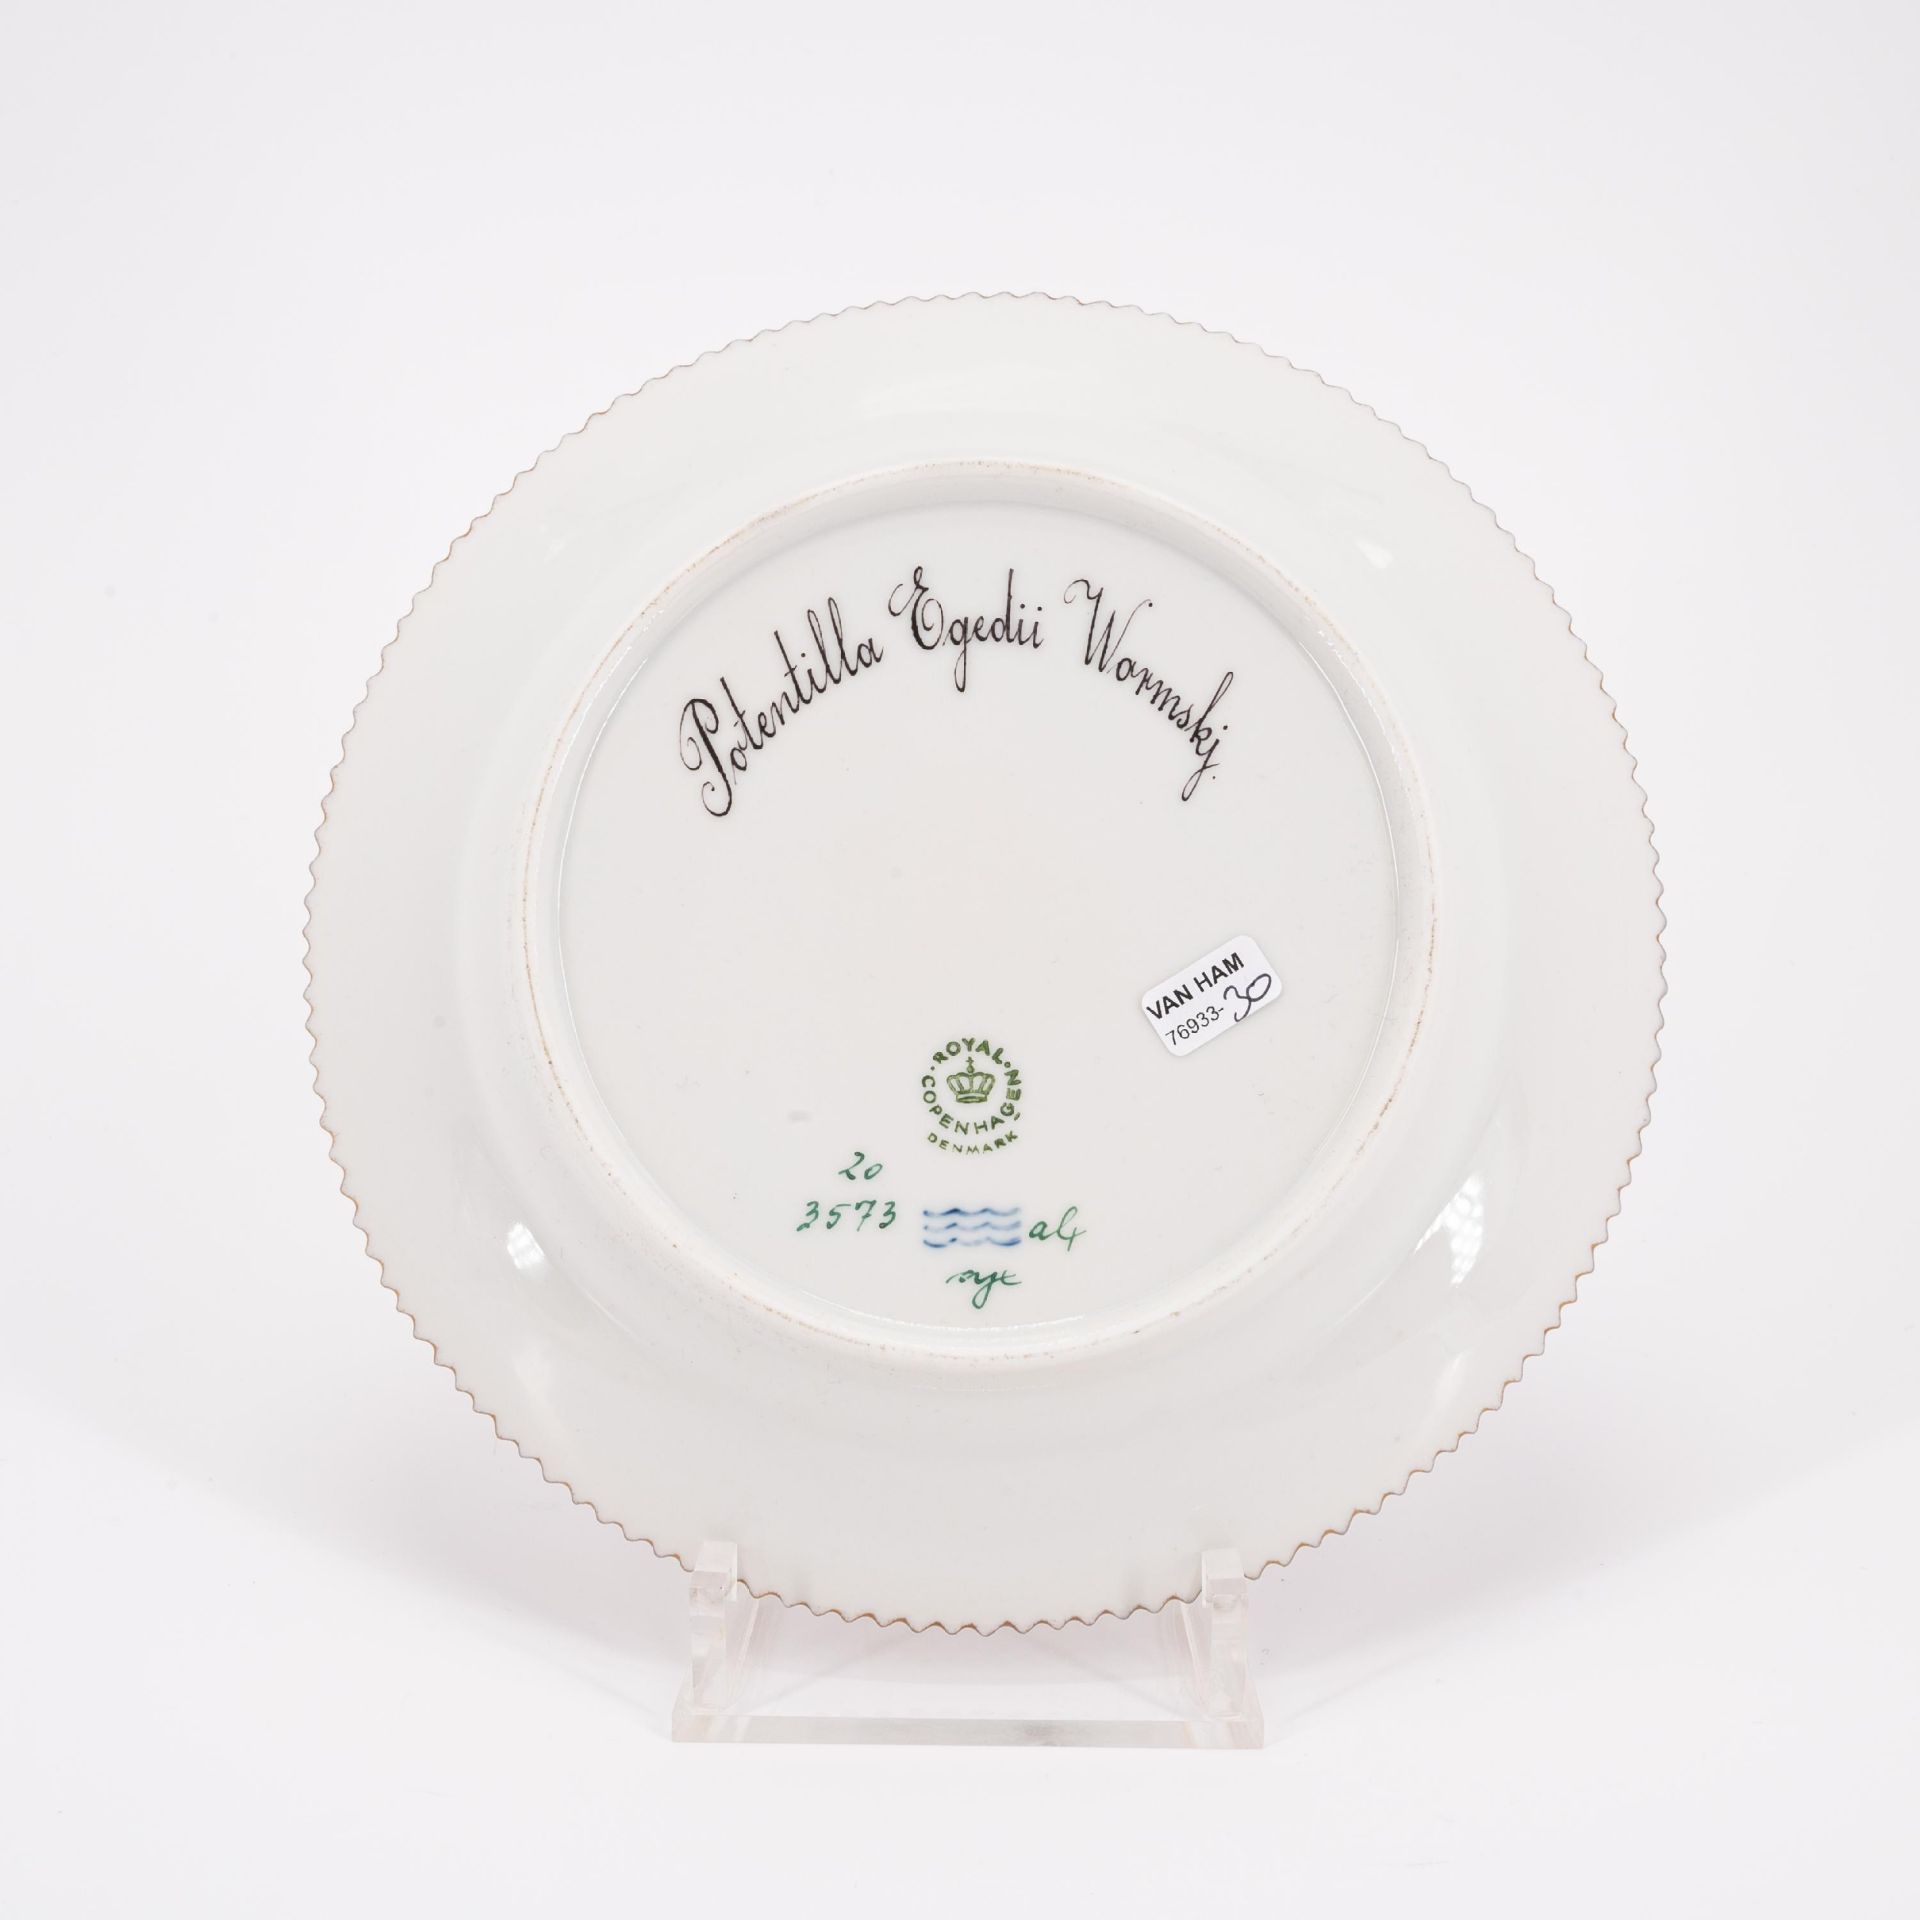 Royal Copenhagen: 95 PIECES FROM A 'FLORA DANICA' DINING SERVICE - Image 21 of 26